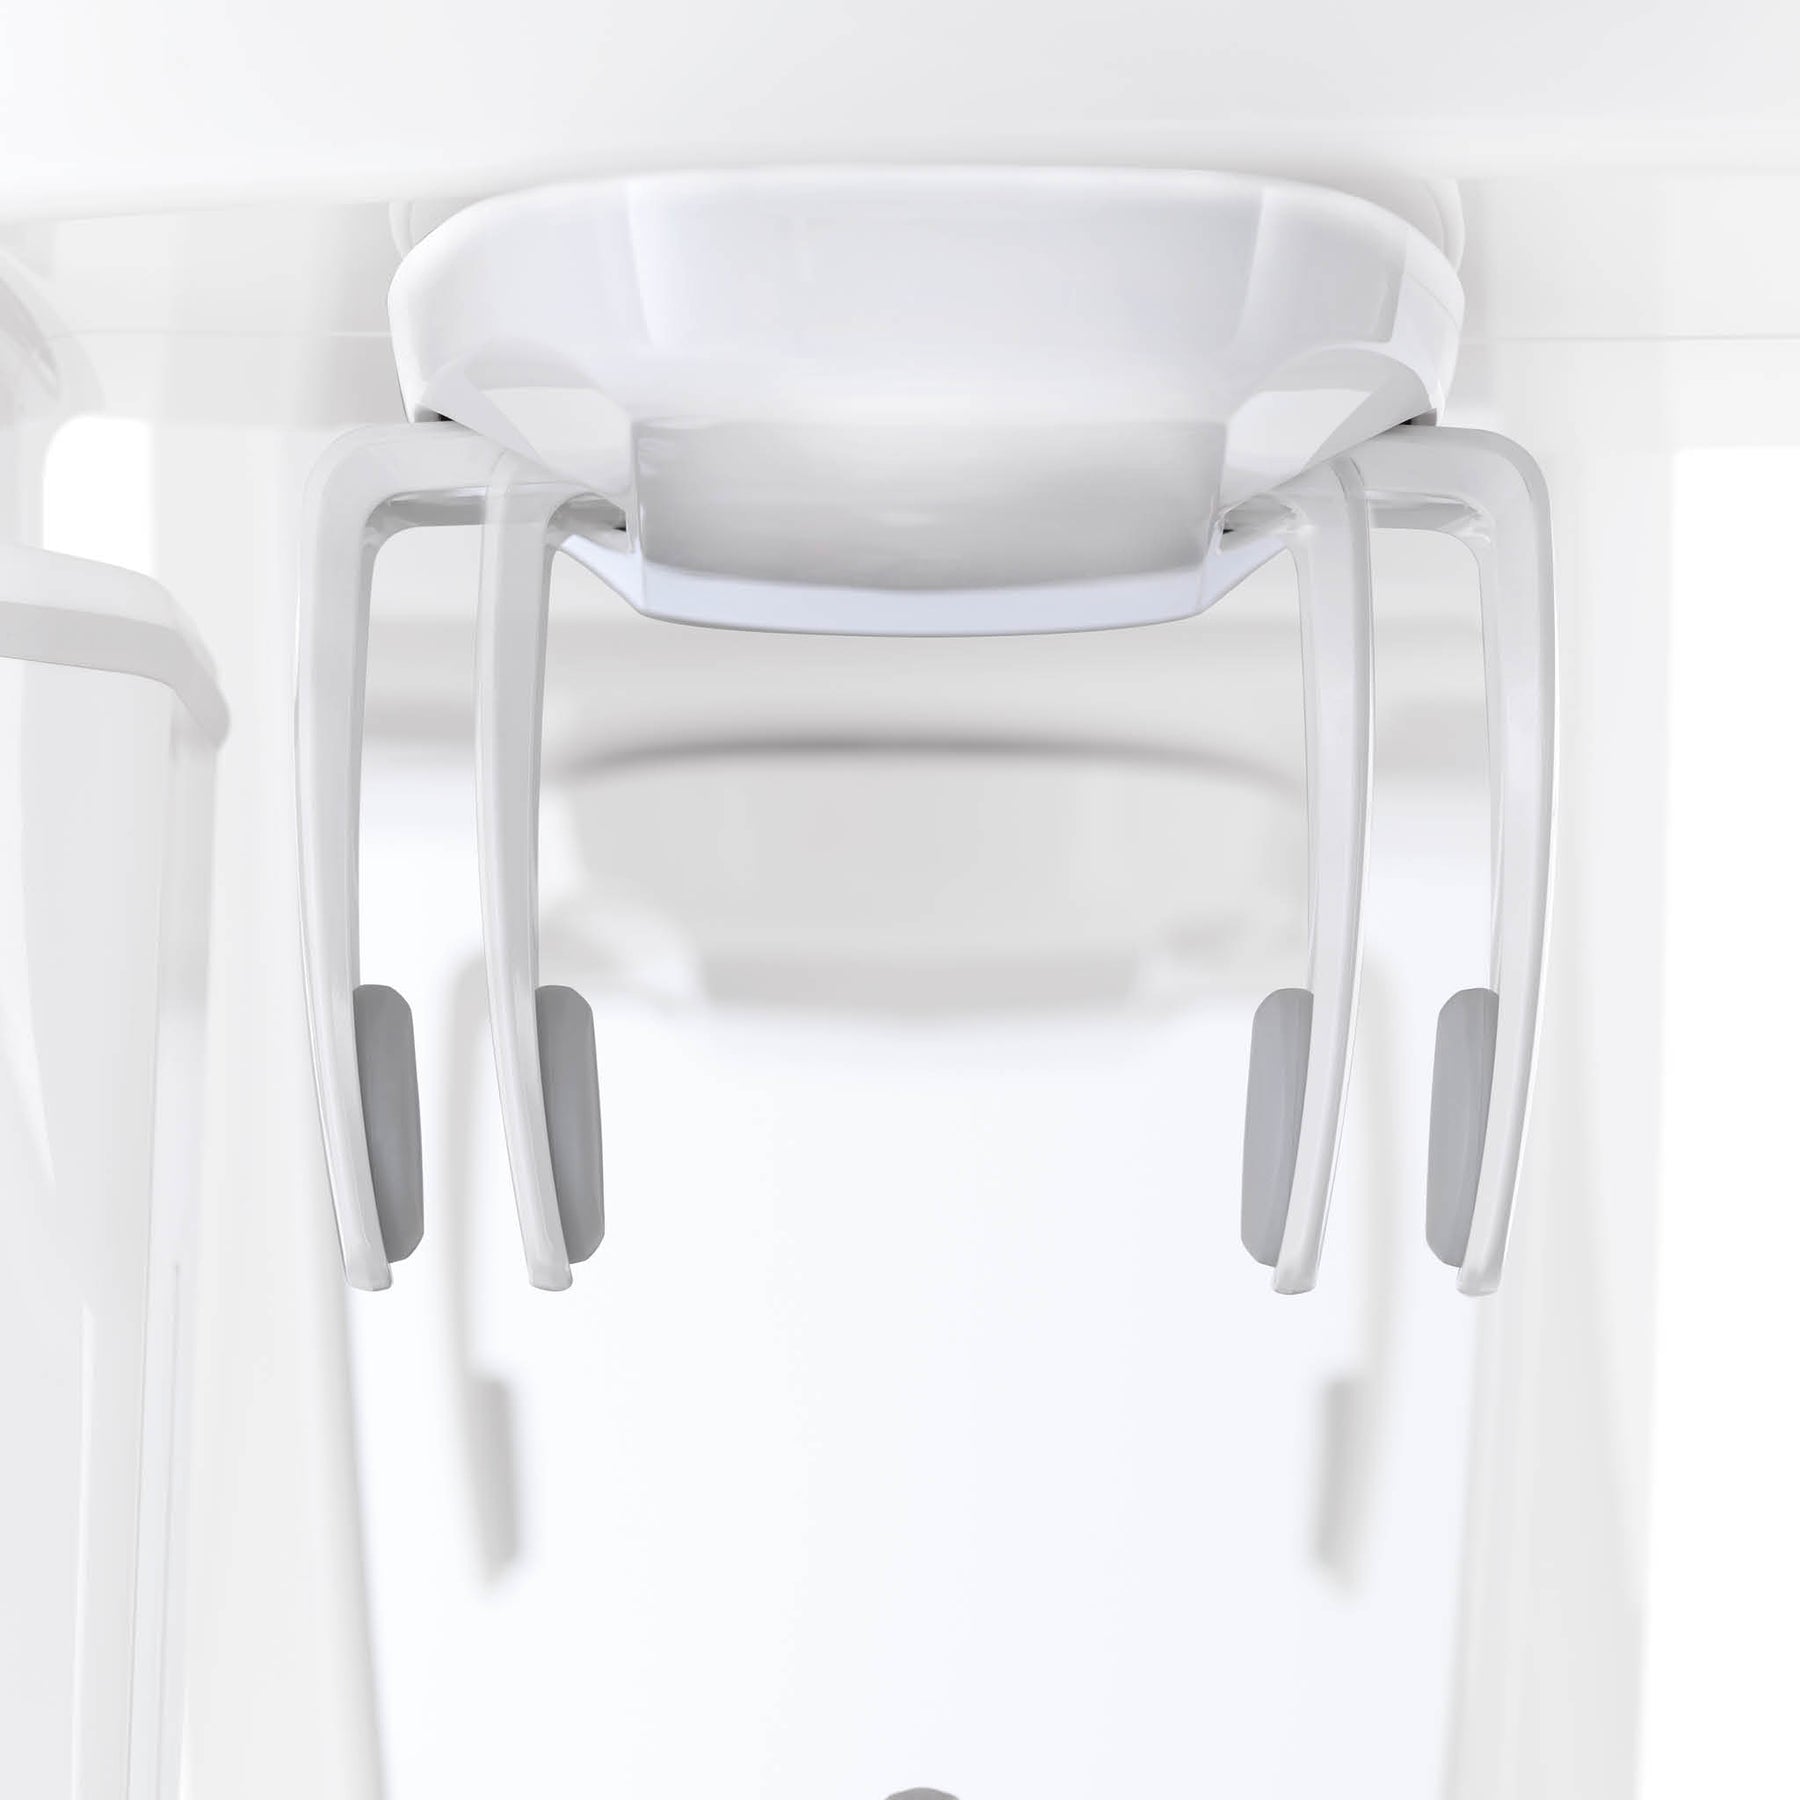 NewTom GO 2D/3D. The head support unit, which includes four partly adjustable contact points, guides the patient into the correct position for every kind of examination.